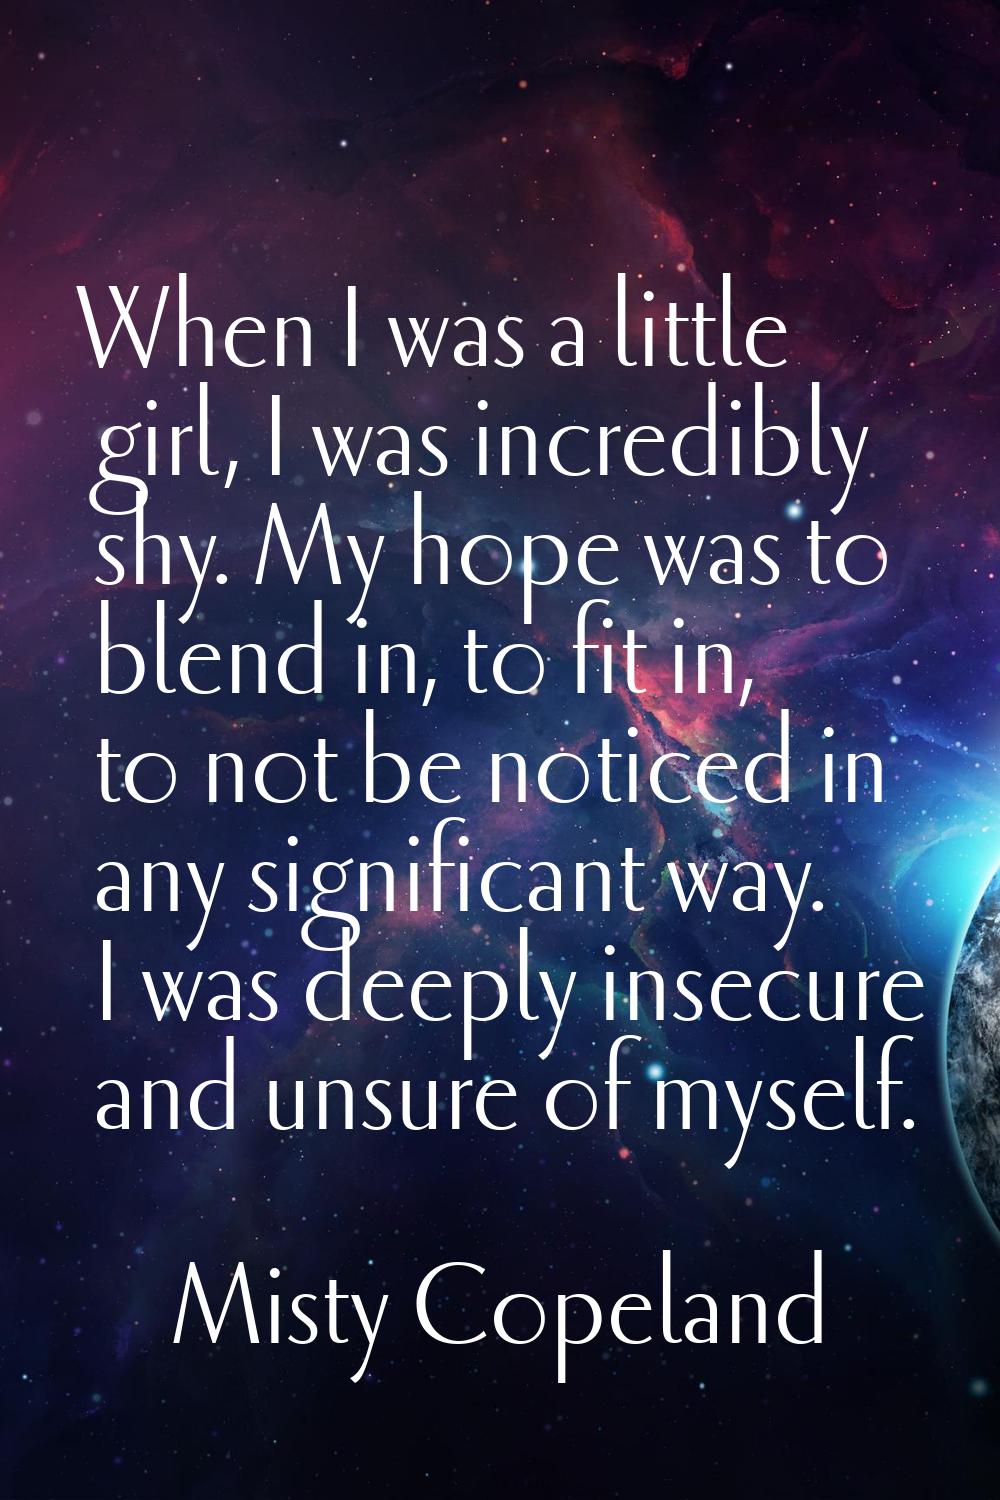 When I was a little girl, I was incredibly shy. My hope was to blend in, to fit in, to not be notic